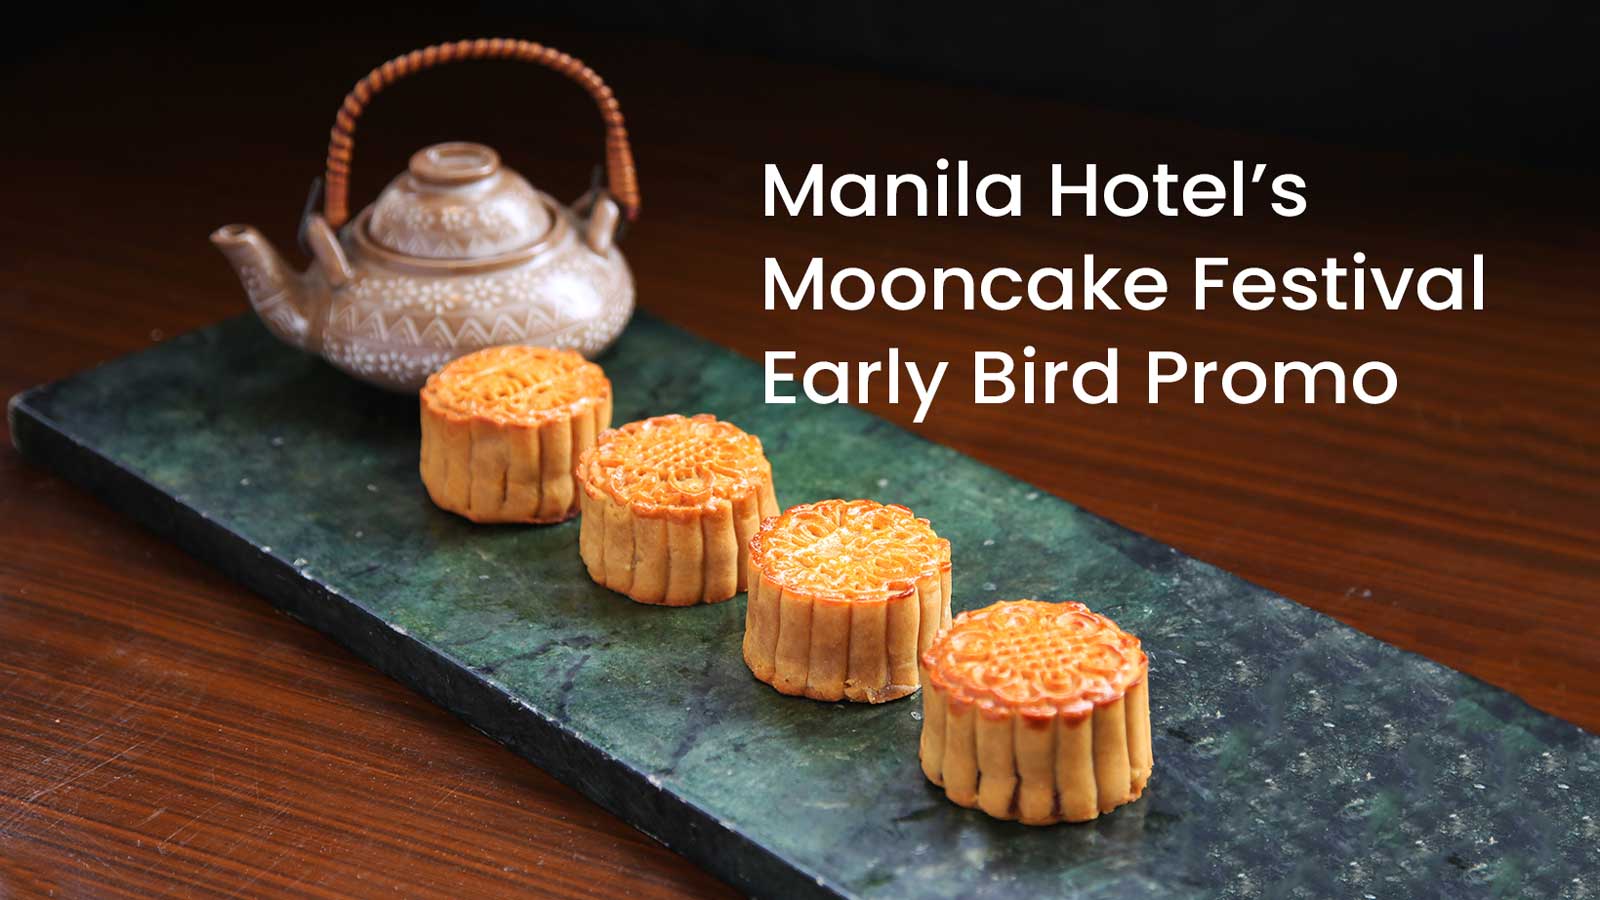 The Manila Hotel mooncakes express gratitude and a wish of togetherness